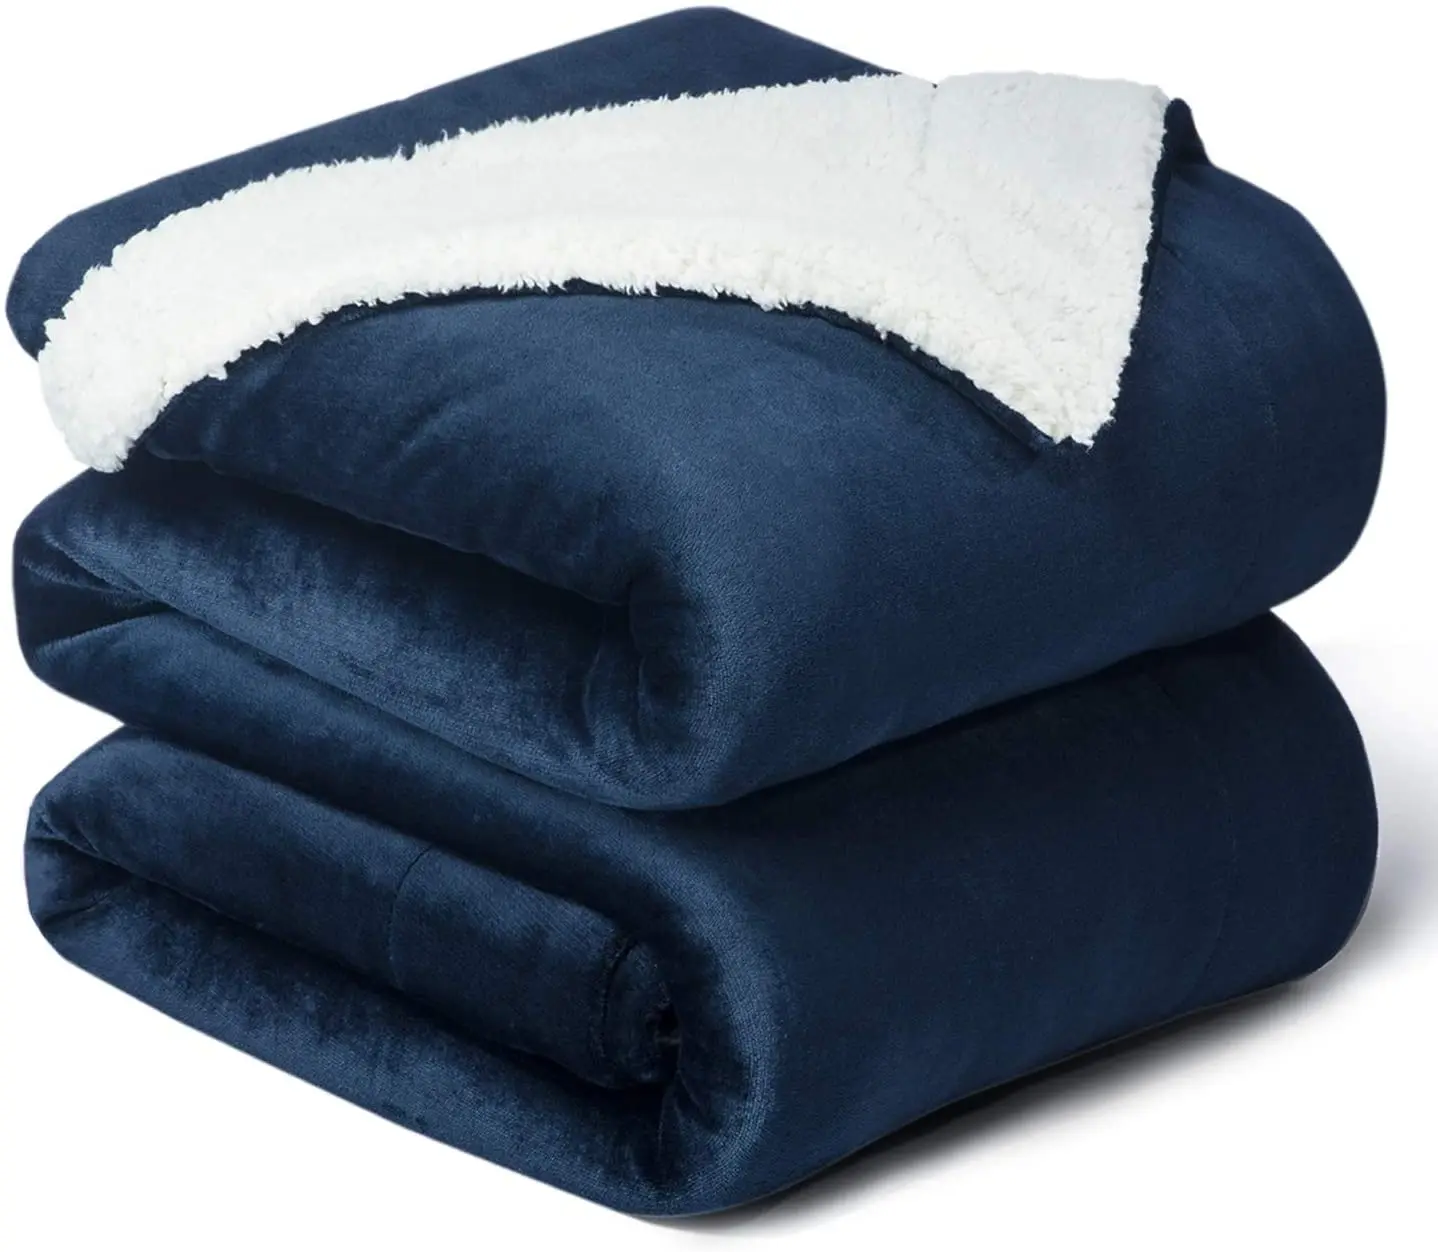 BREEZE NAVY BLUE SHAGGY BLANKET WITH SHERPA VERY SOFTY THICK WARM KING SIZE 